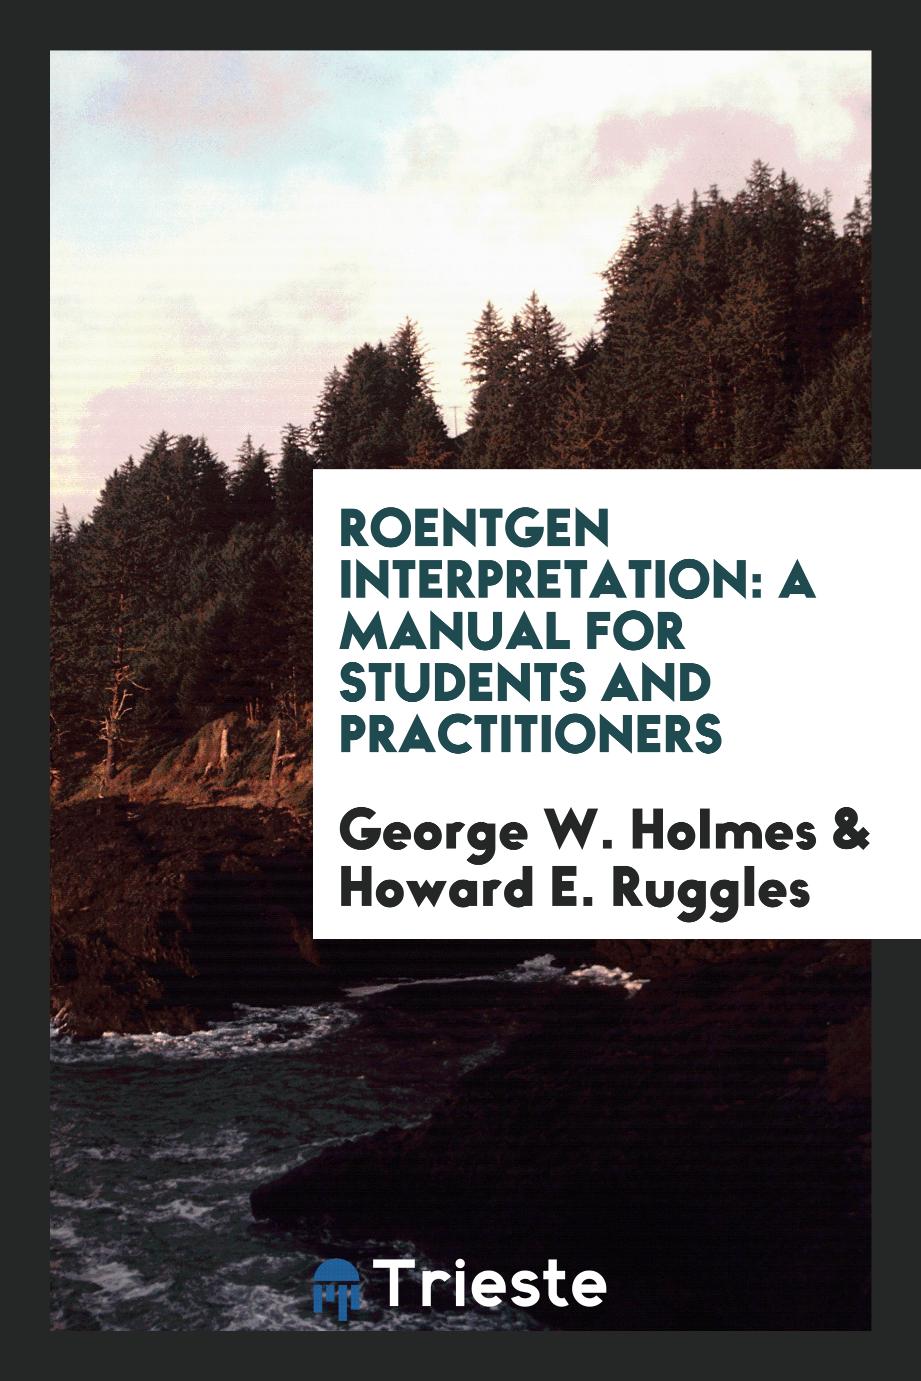 Roentgen Interpretation: A Manual for Students and Practitioners